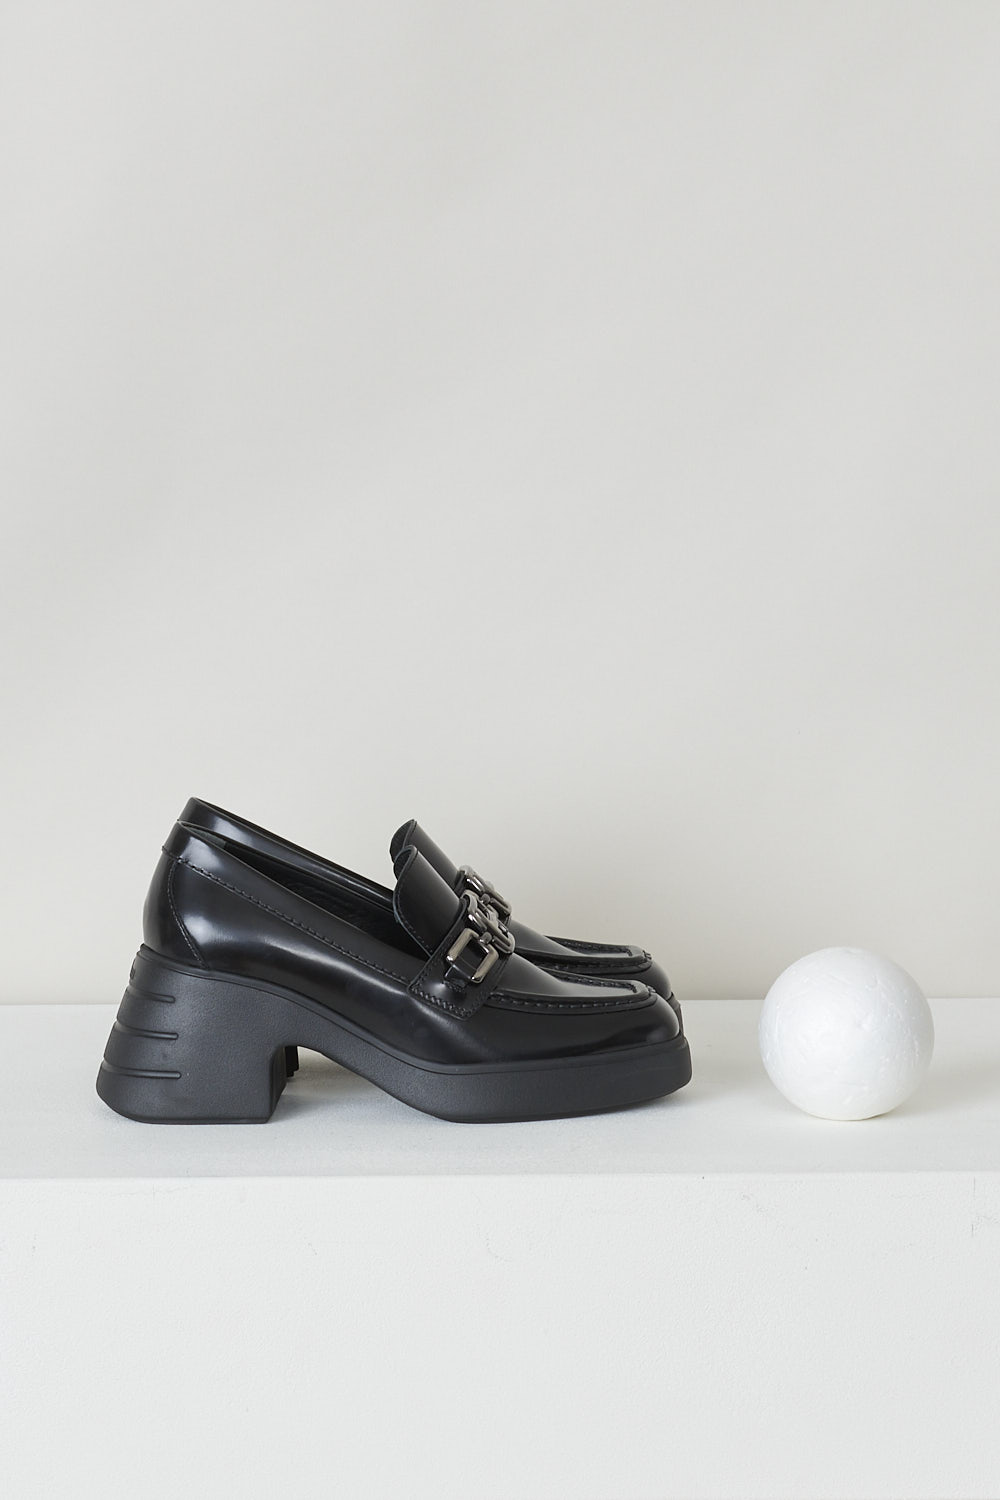 HOGAN, BLACK HEELED MOCCASINS, HXW6180EP40RWWB999_H618_MOCASSINO_ACCESSORIO, Black, Side, These slip-on loafers have a squared off toe with toe stitching and an silver-tone H-shaped buckle over the upper side. The loafers have a chunky black sole. 

